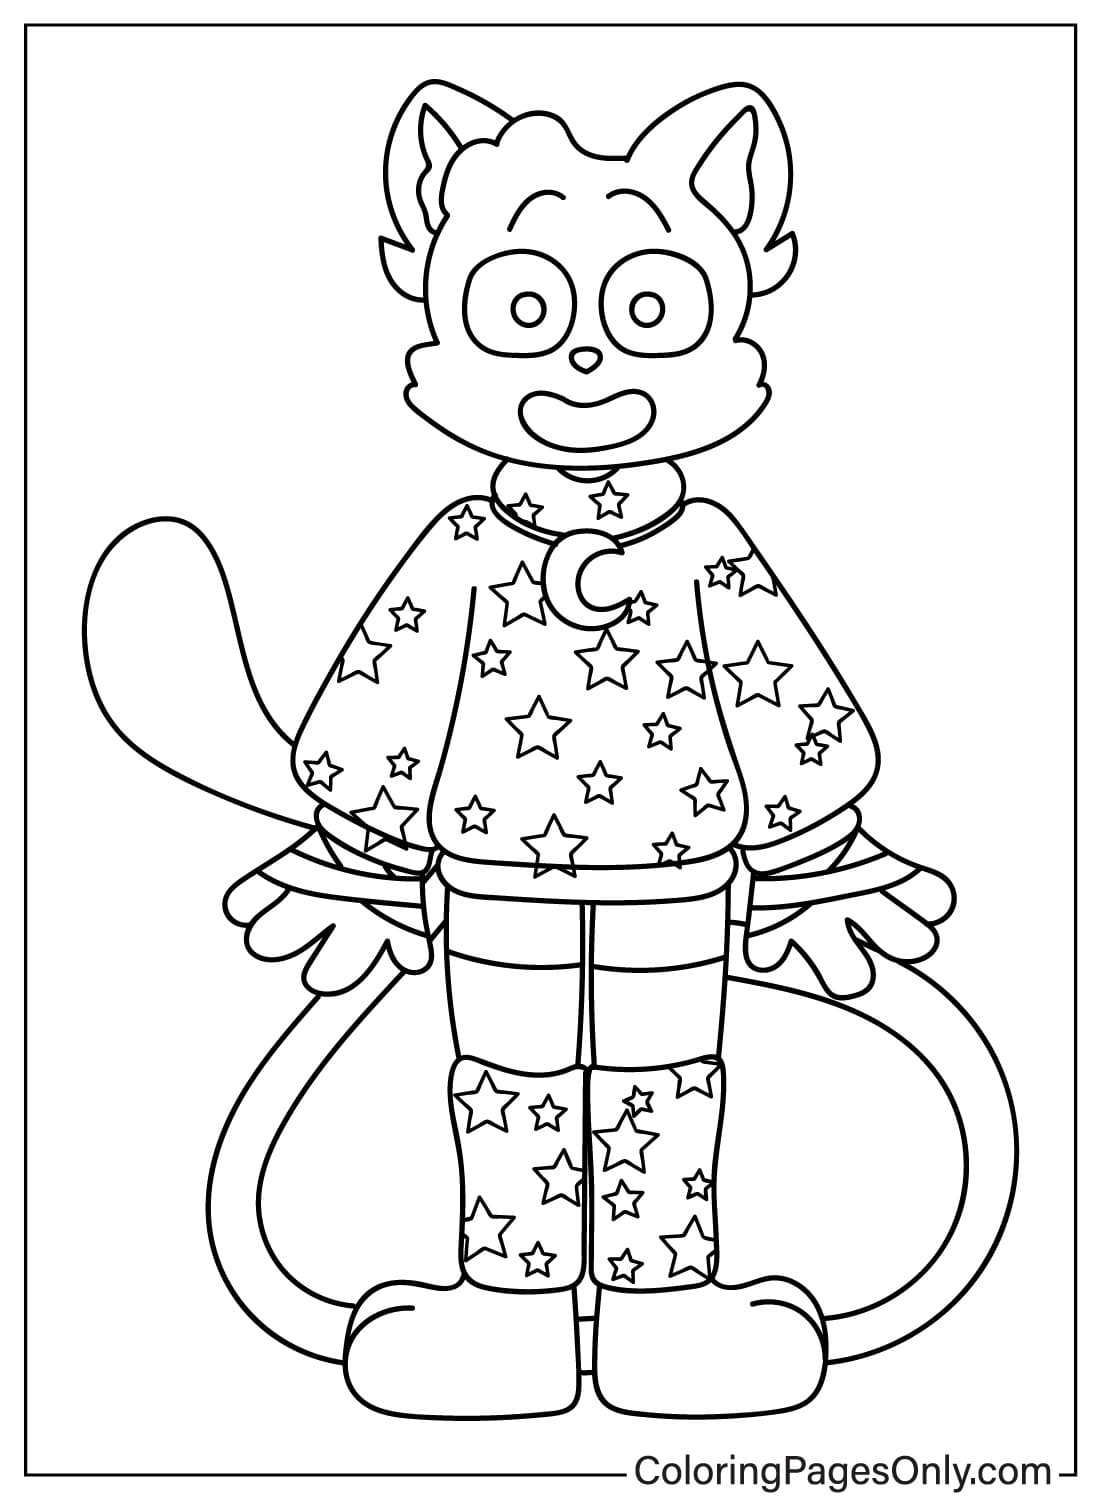 CatNap Free Printable Coloring Page from CatNap